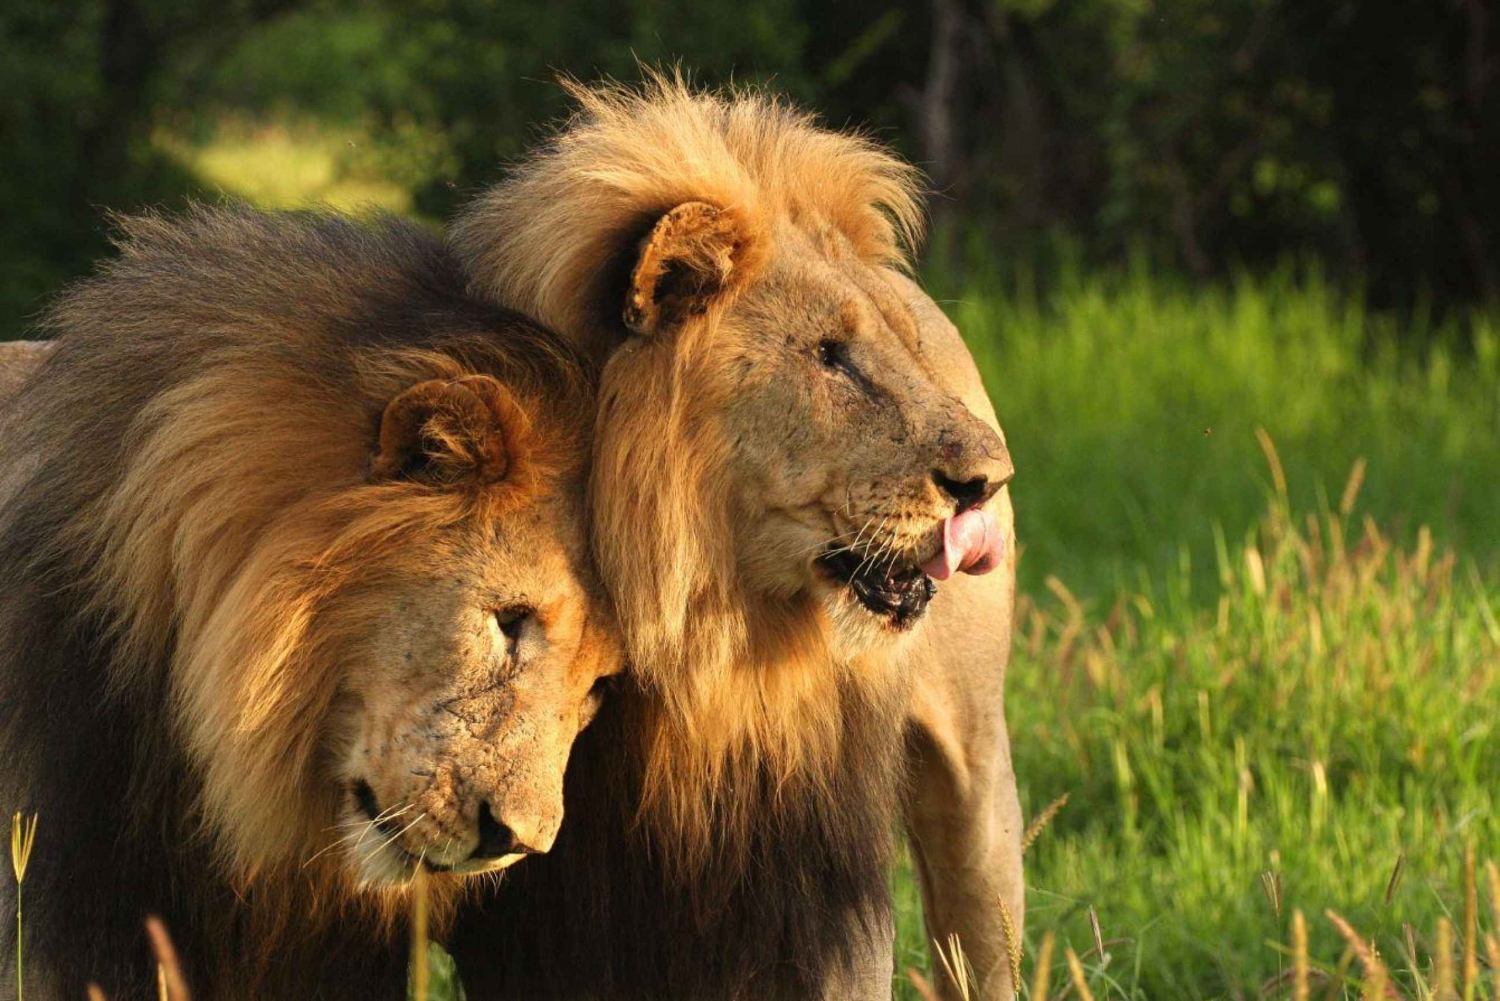 Tala Game Reserve & Natal Lion Park Day Tour From Durban